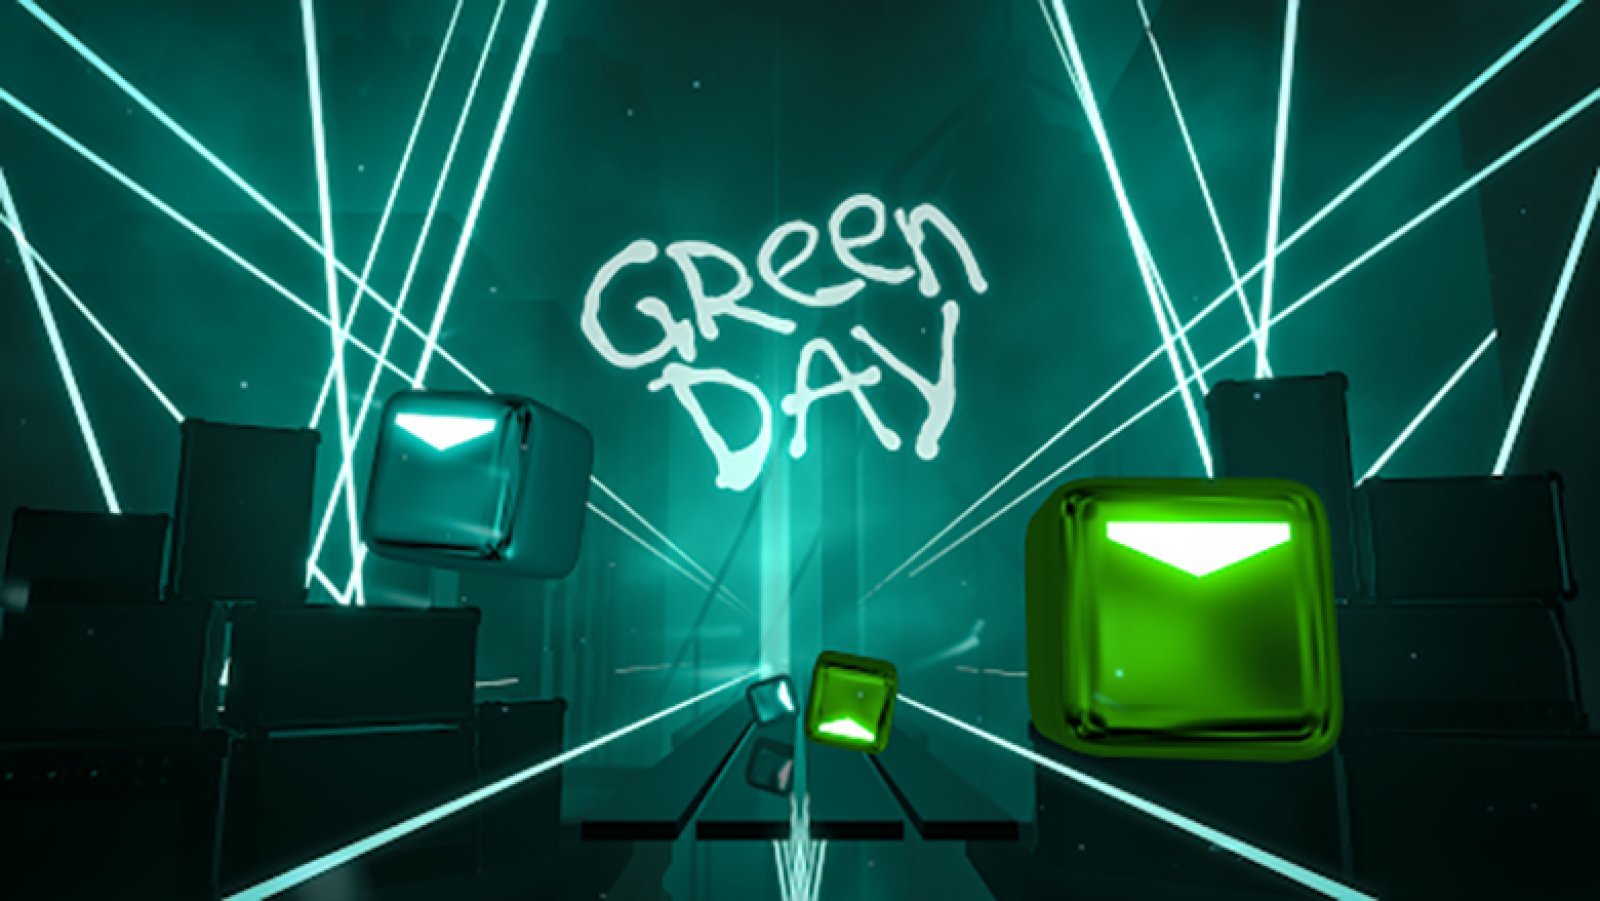 Green Day Pack Live on Beat Saber to Buy